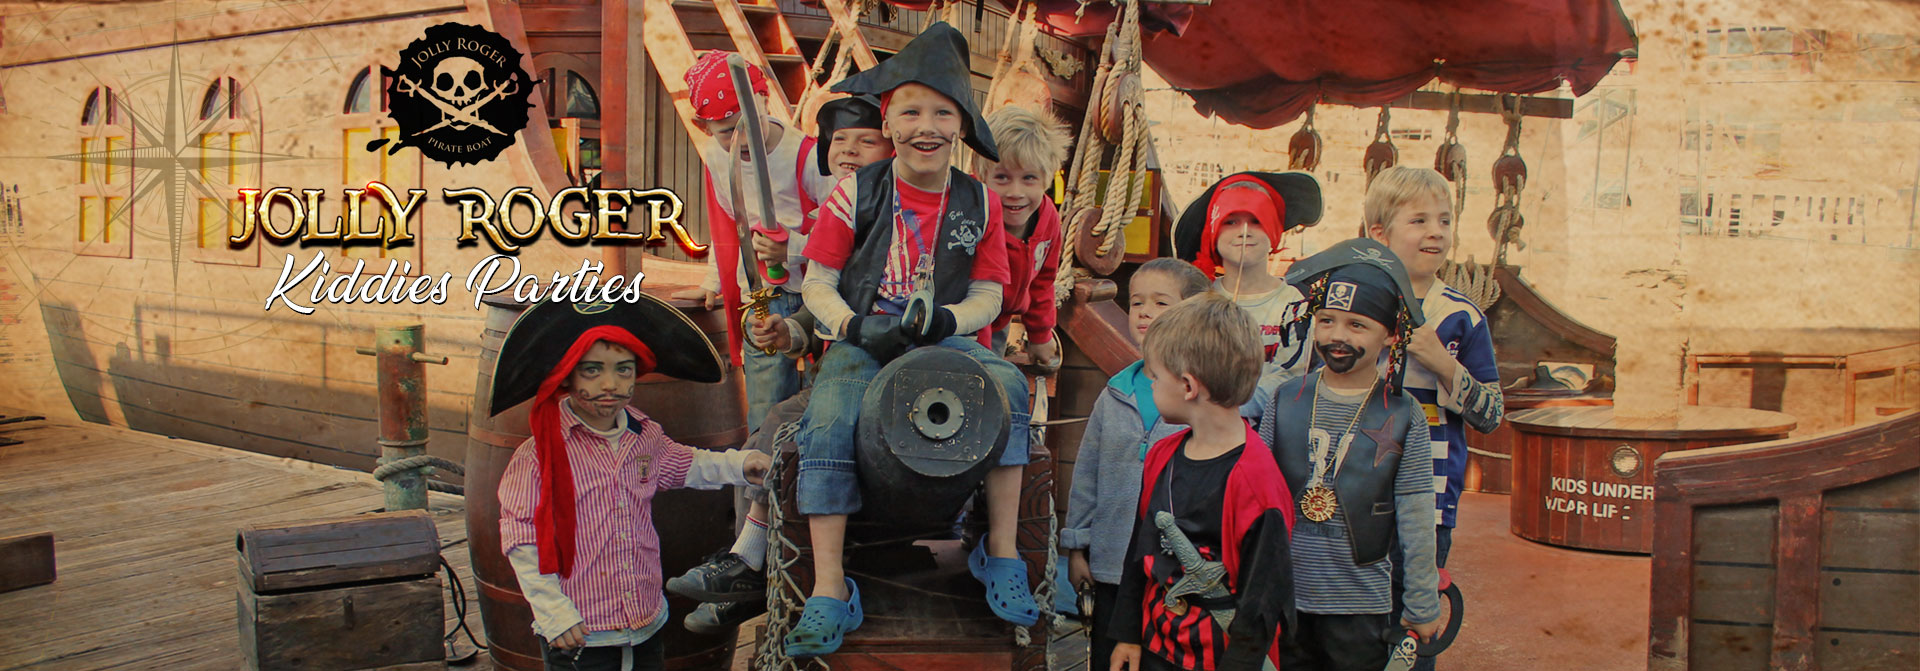 Jolly Roger Pirate Boat Kiddies parties banner image